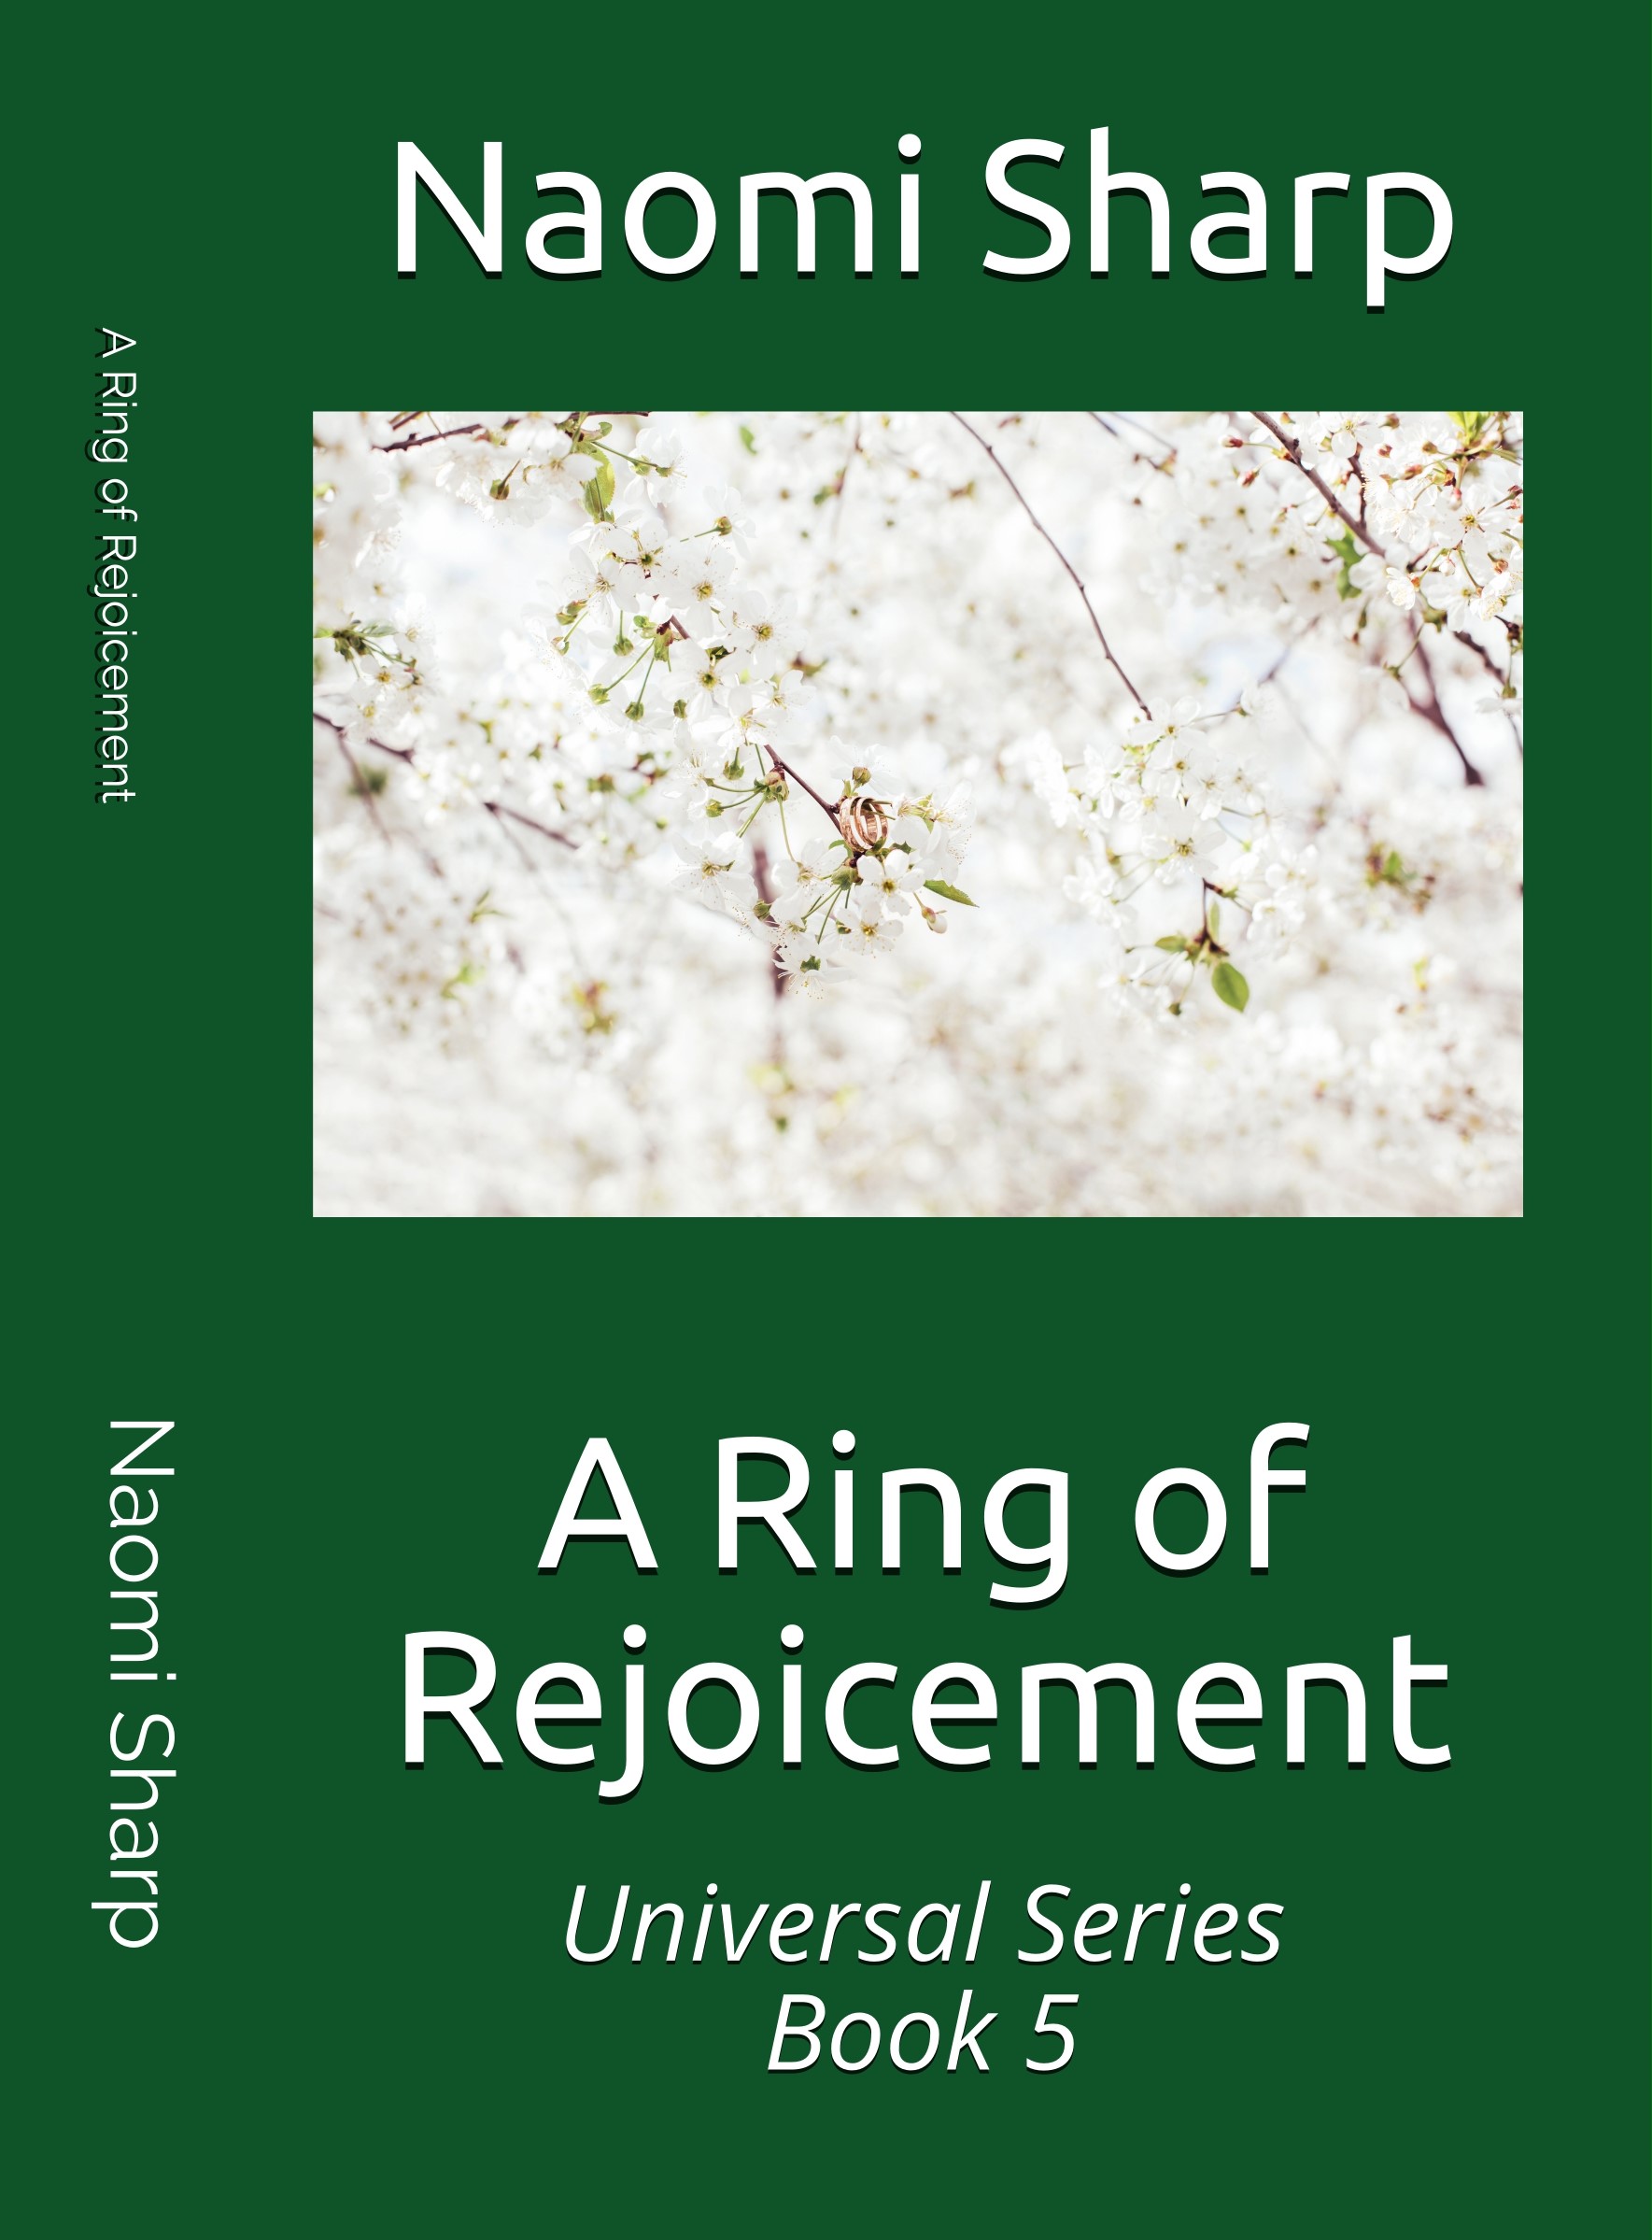 A Ring of Rejoicement